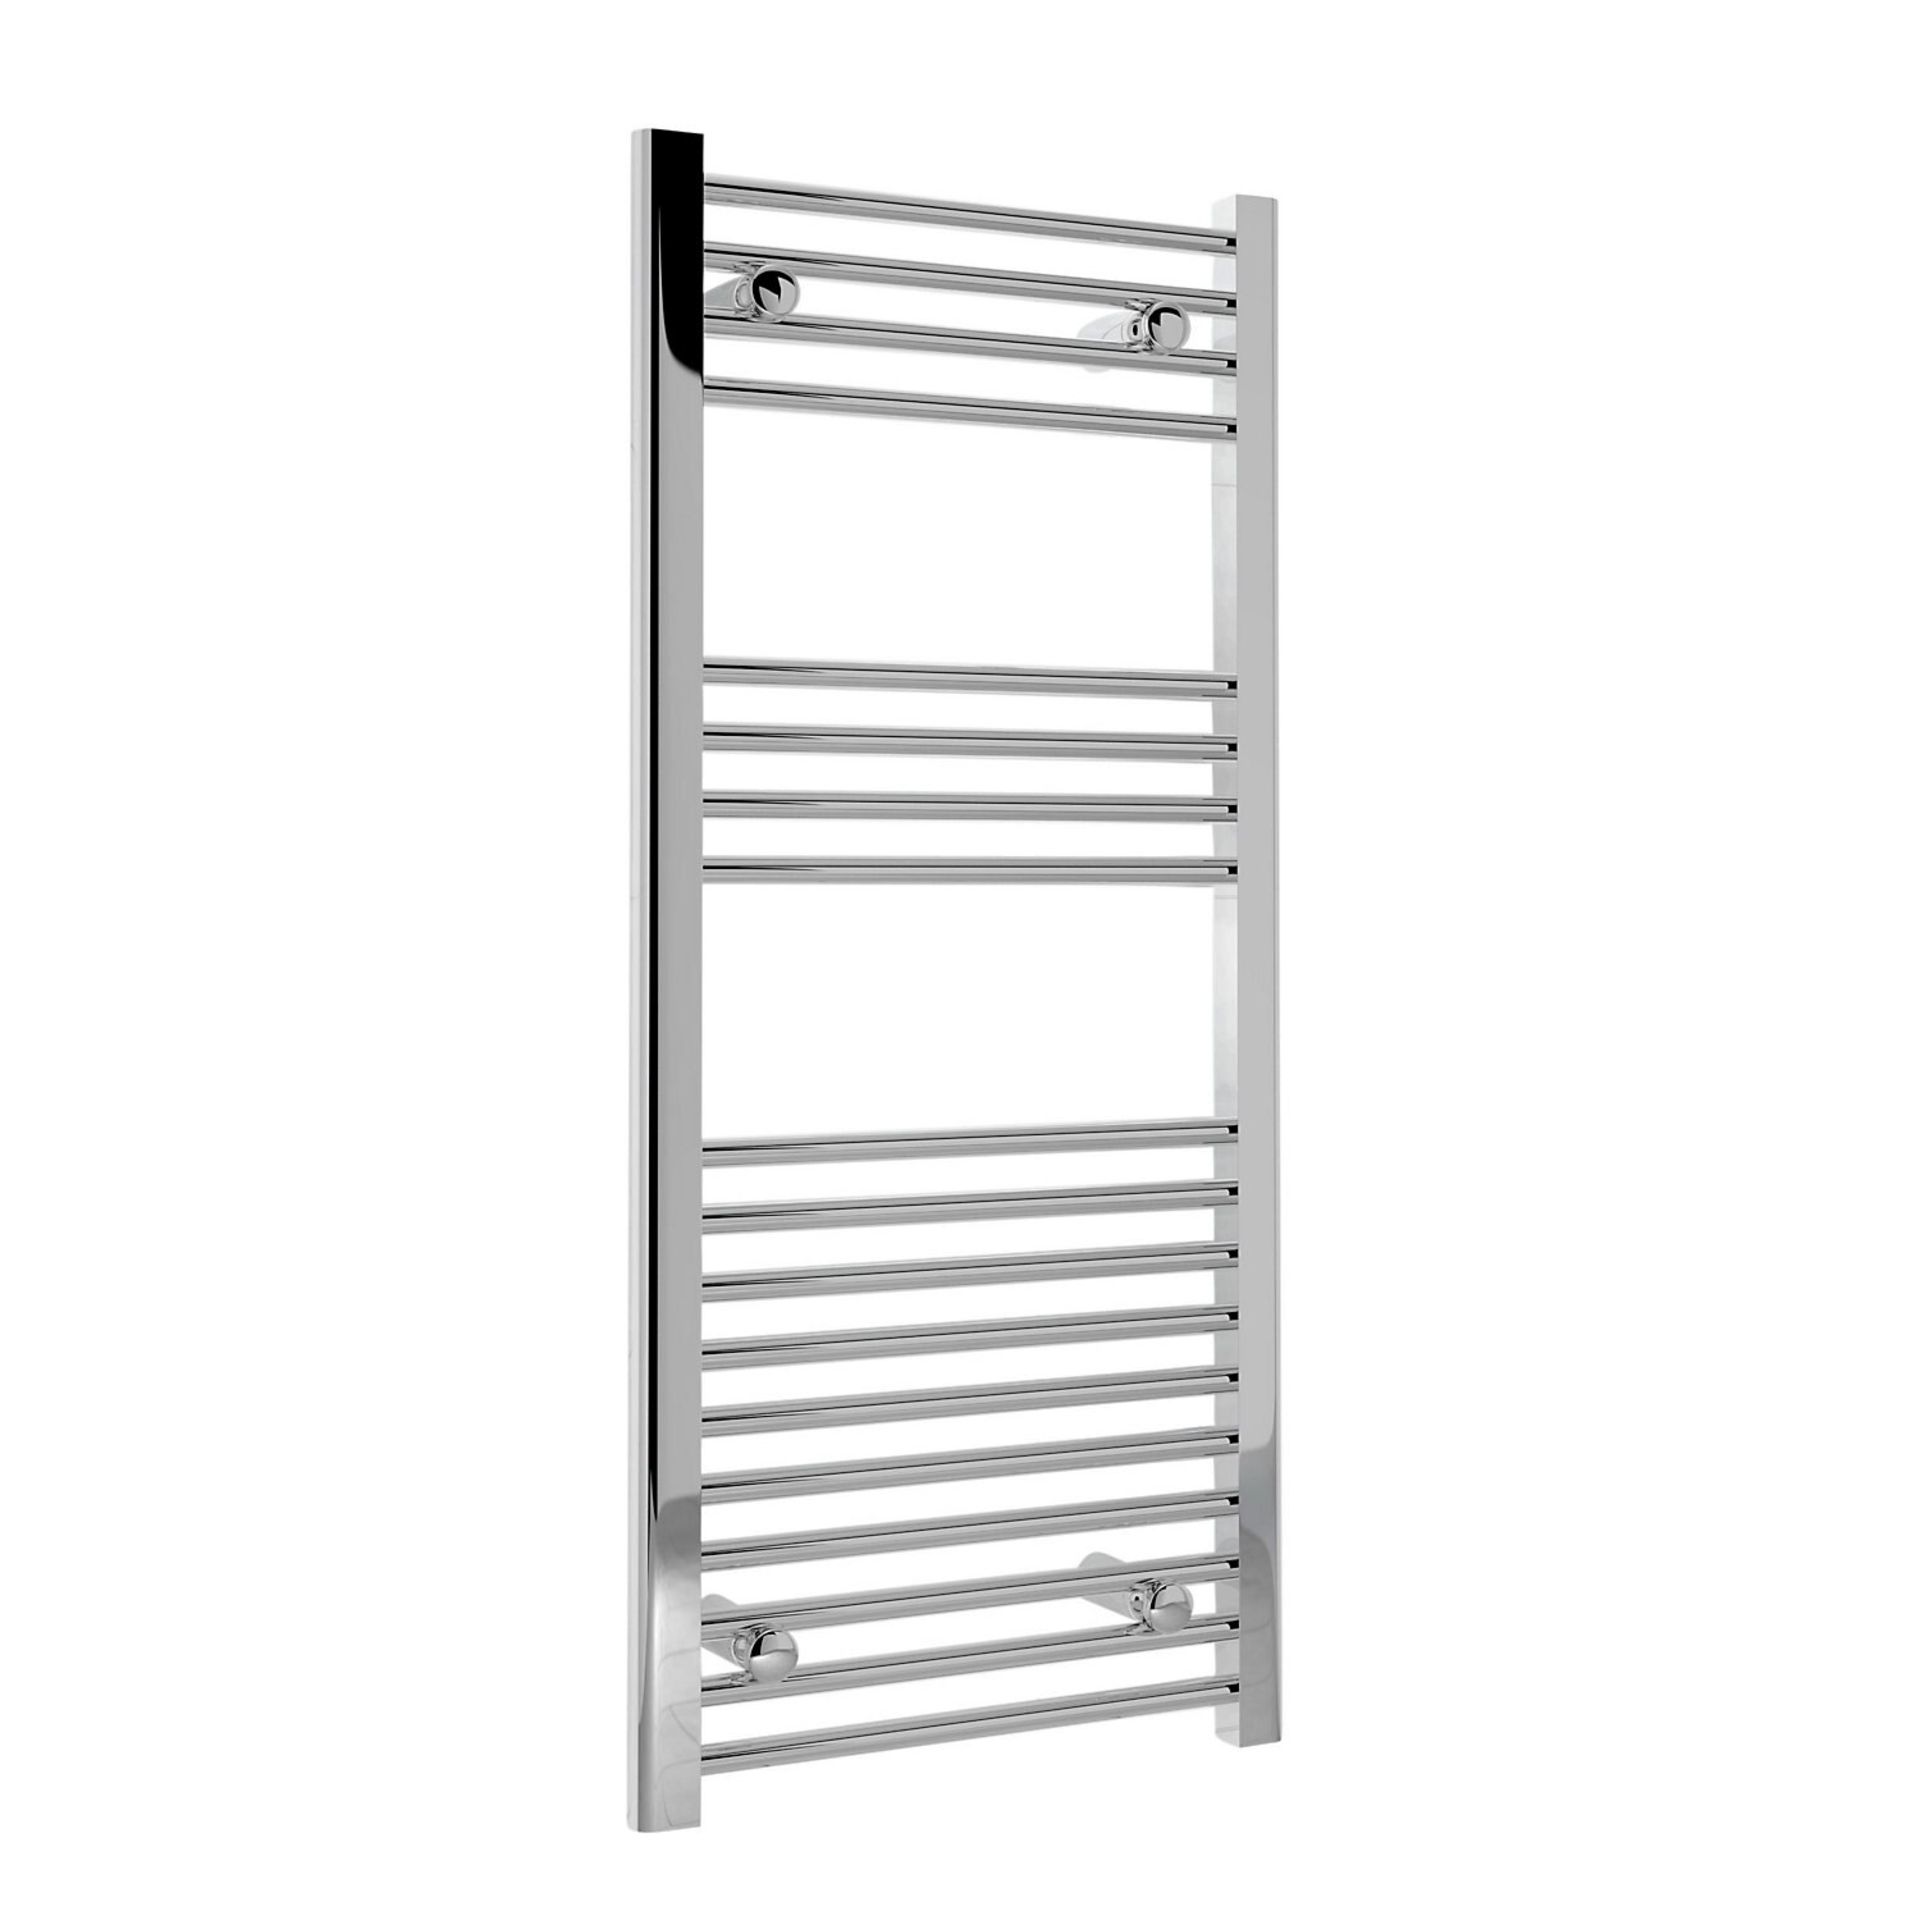 (CT123) 1000 X 450MM Kudox Silver Electric Towel heater. A great towel warmer not only heats your - Image 3 of 3